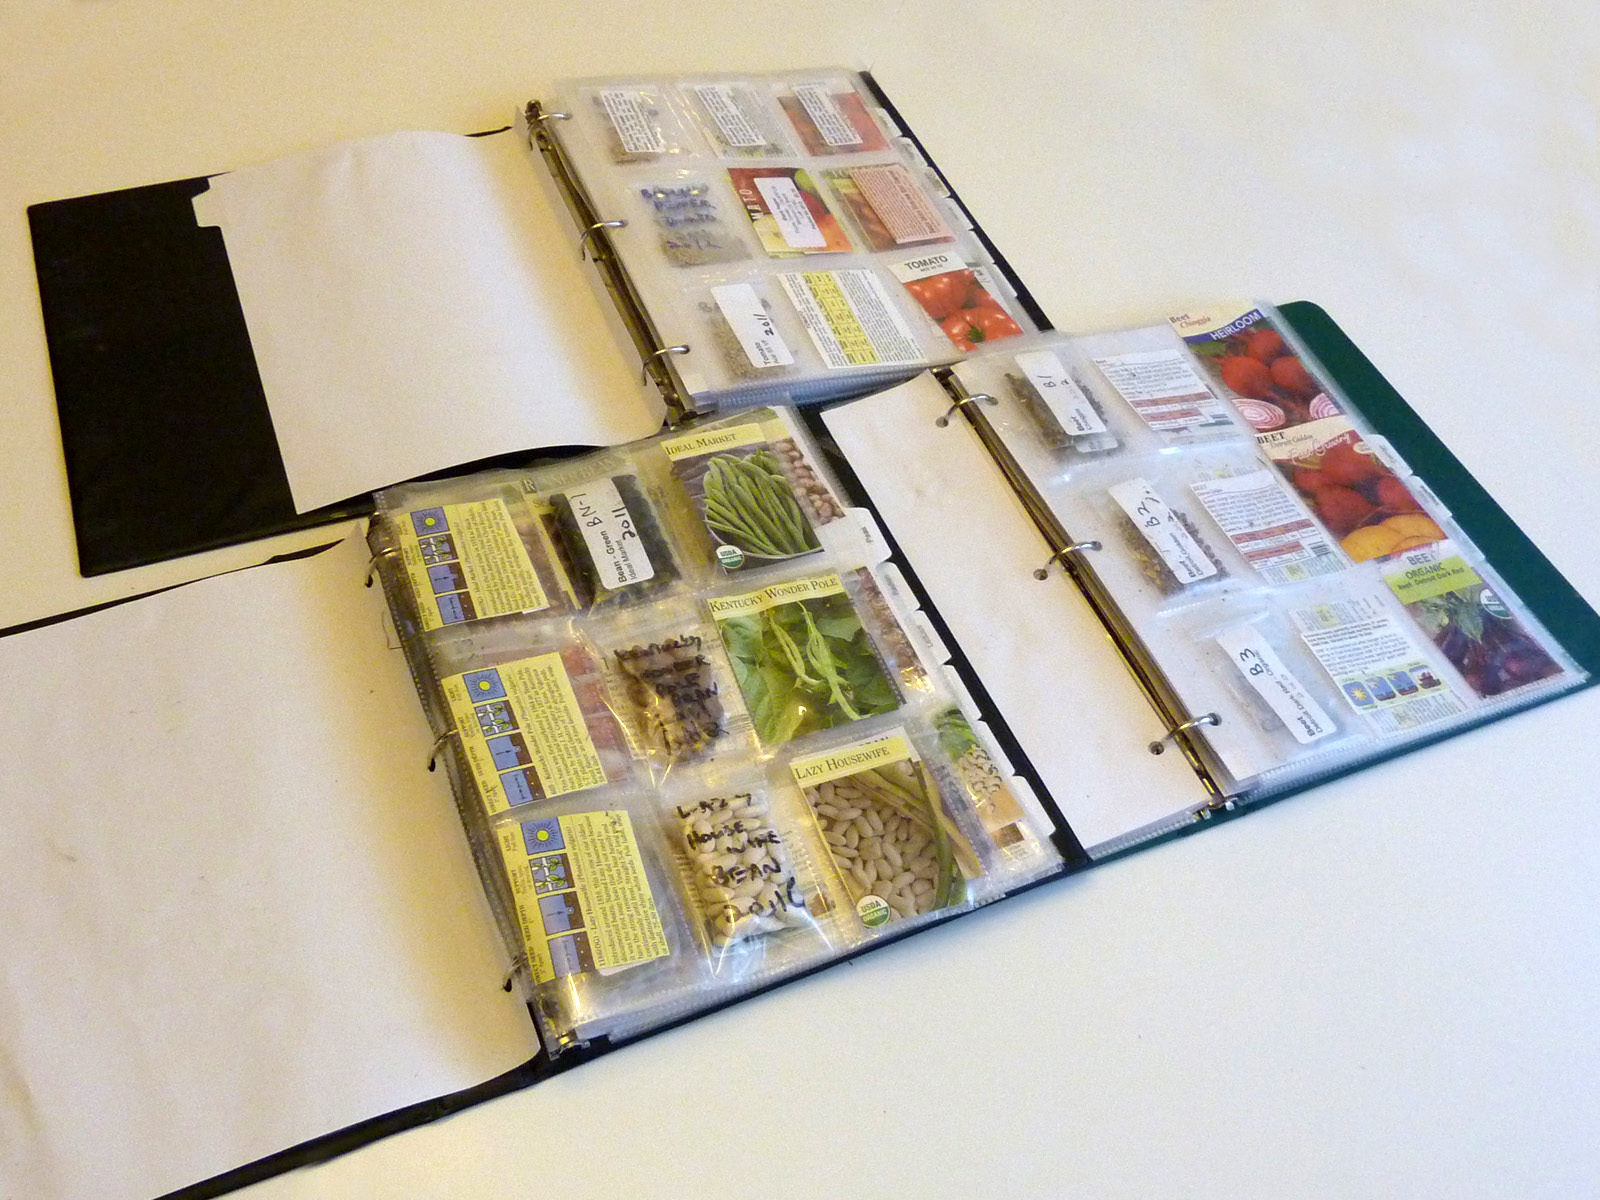 A Simple Seed Storage and Organization System